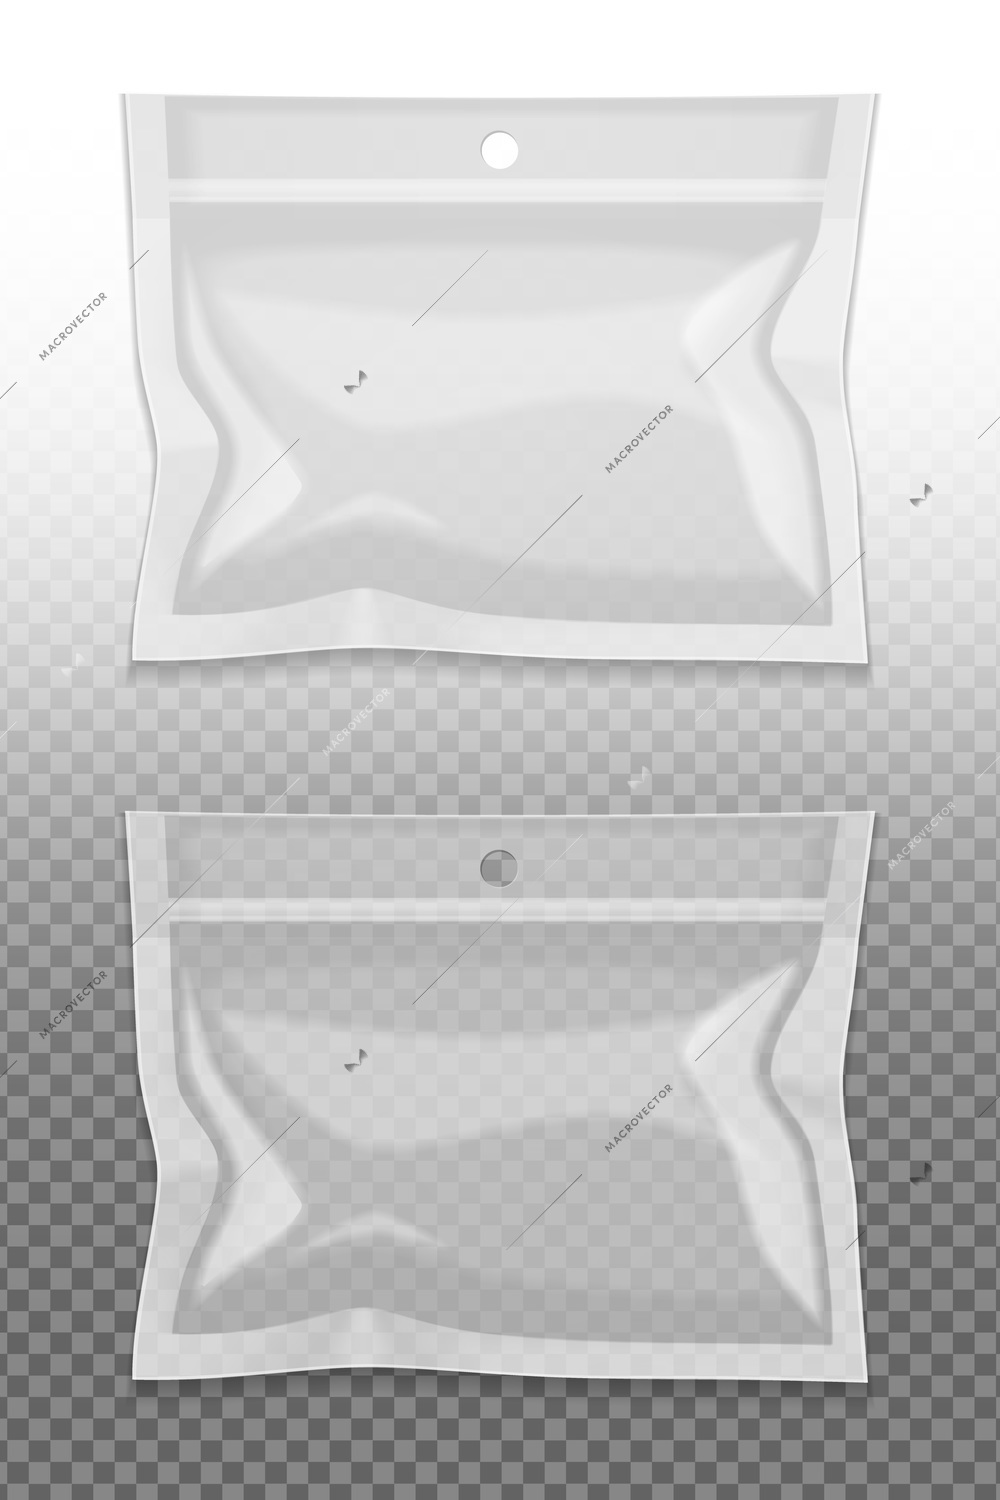 Realistic blank package set on transparent background isolated vector illustration